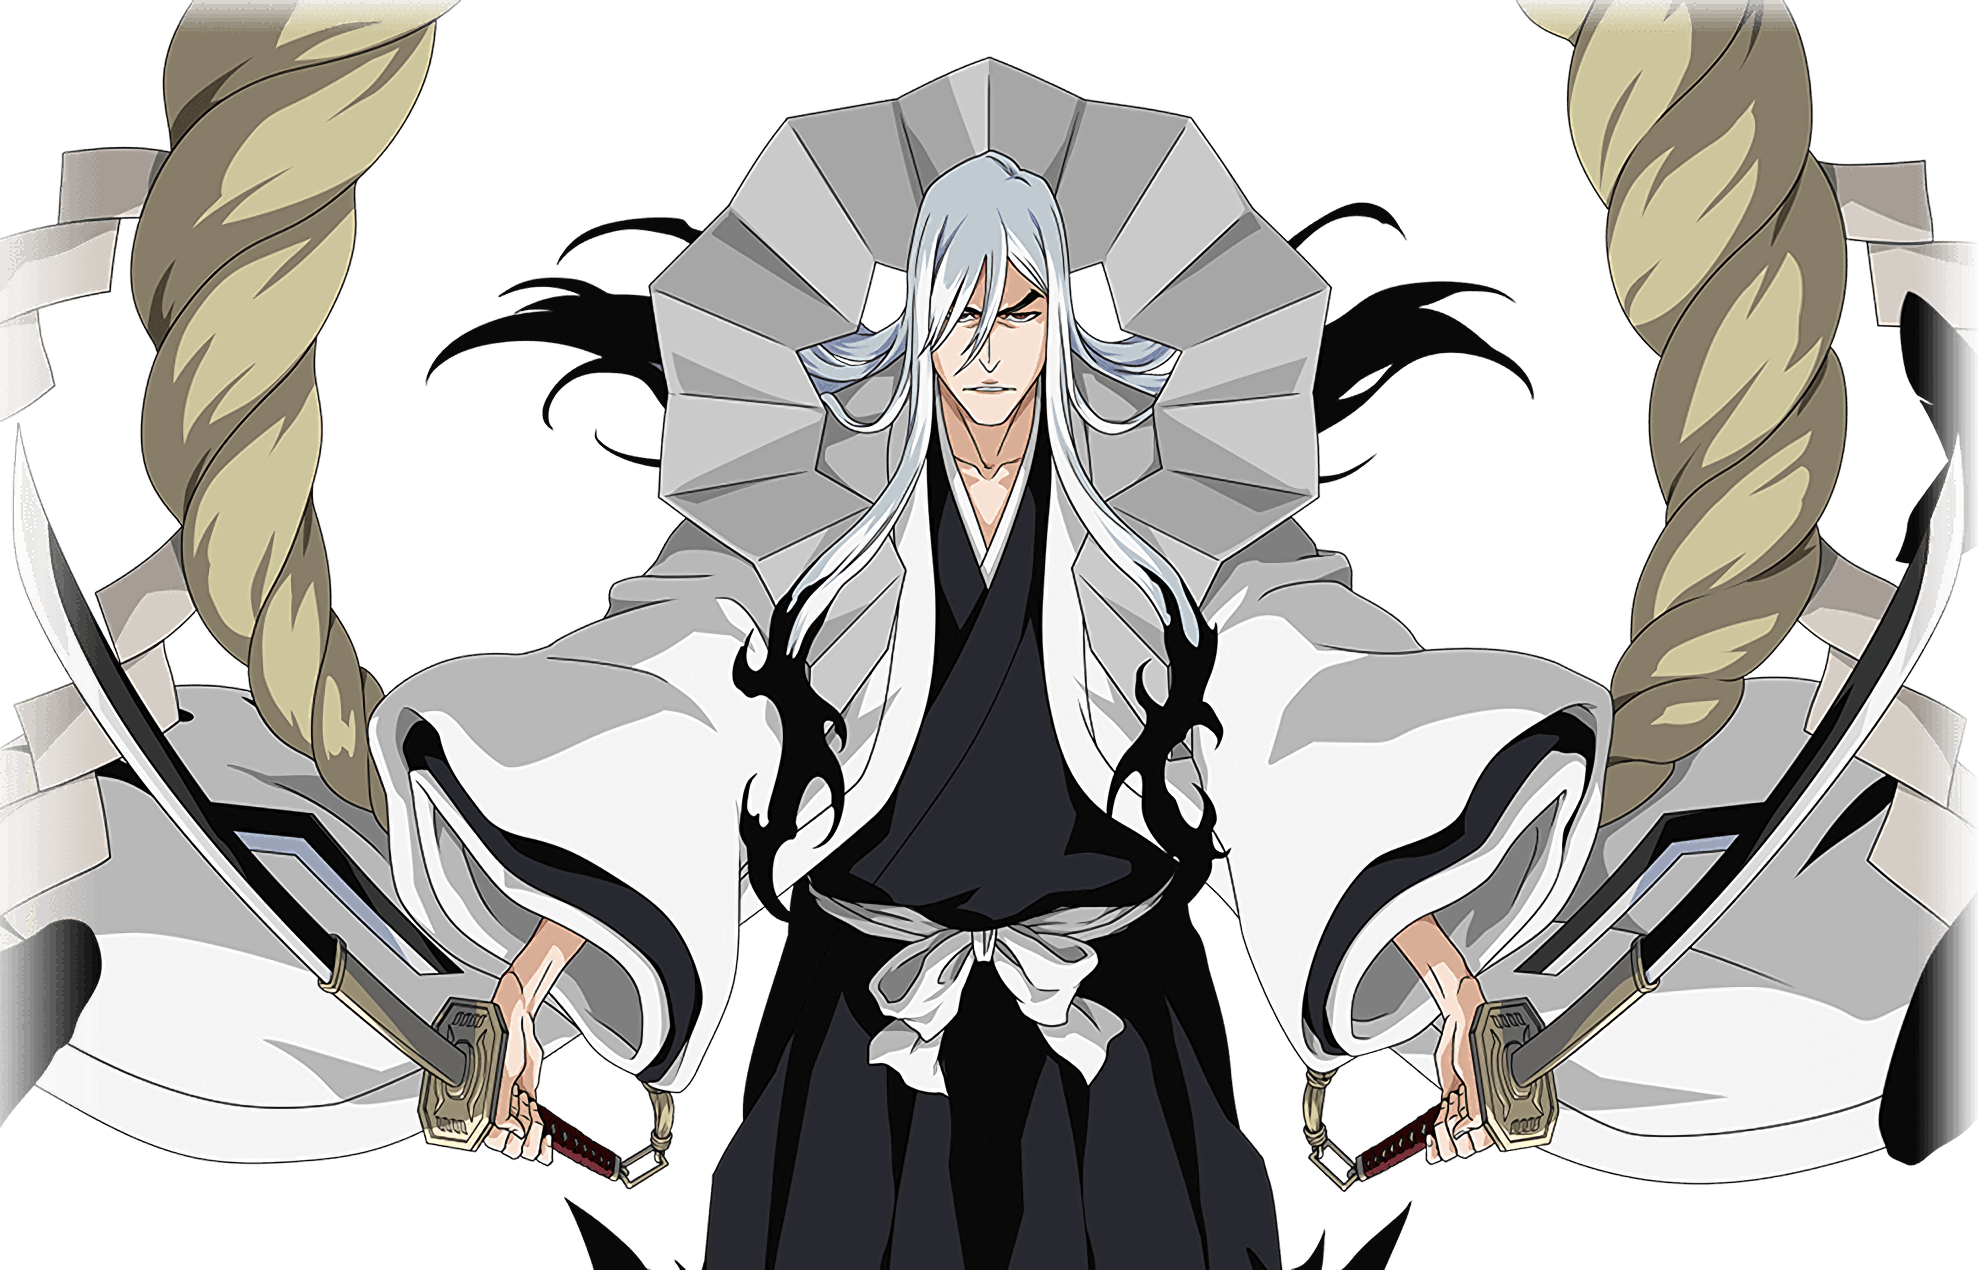 Who is the Most Powerful Character in the Anime Series Bleach?